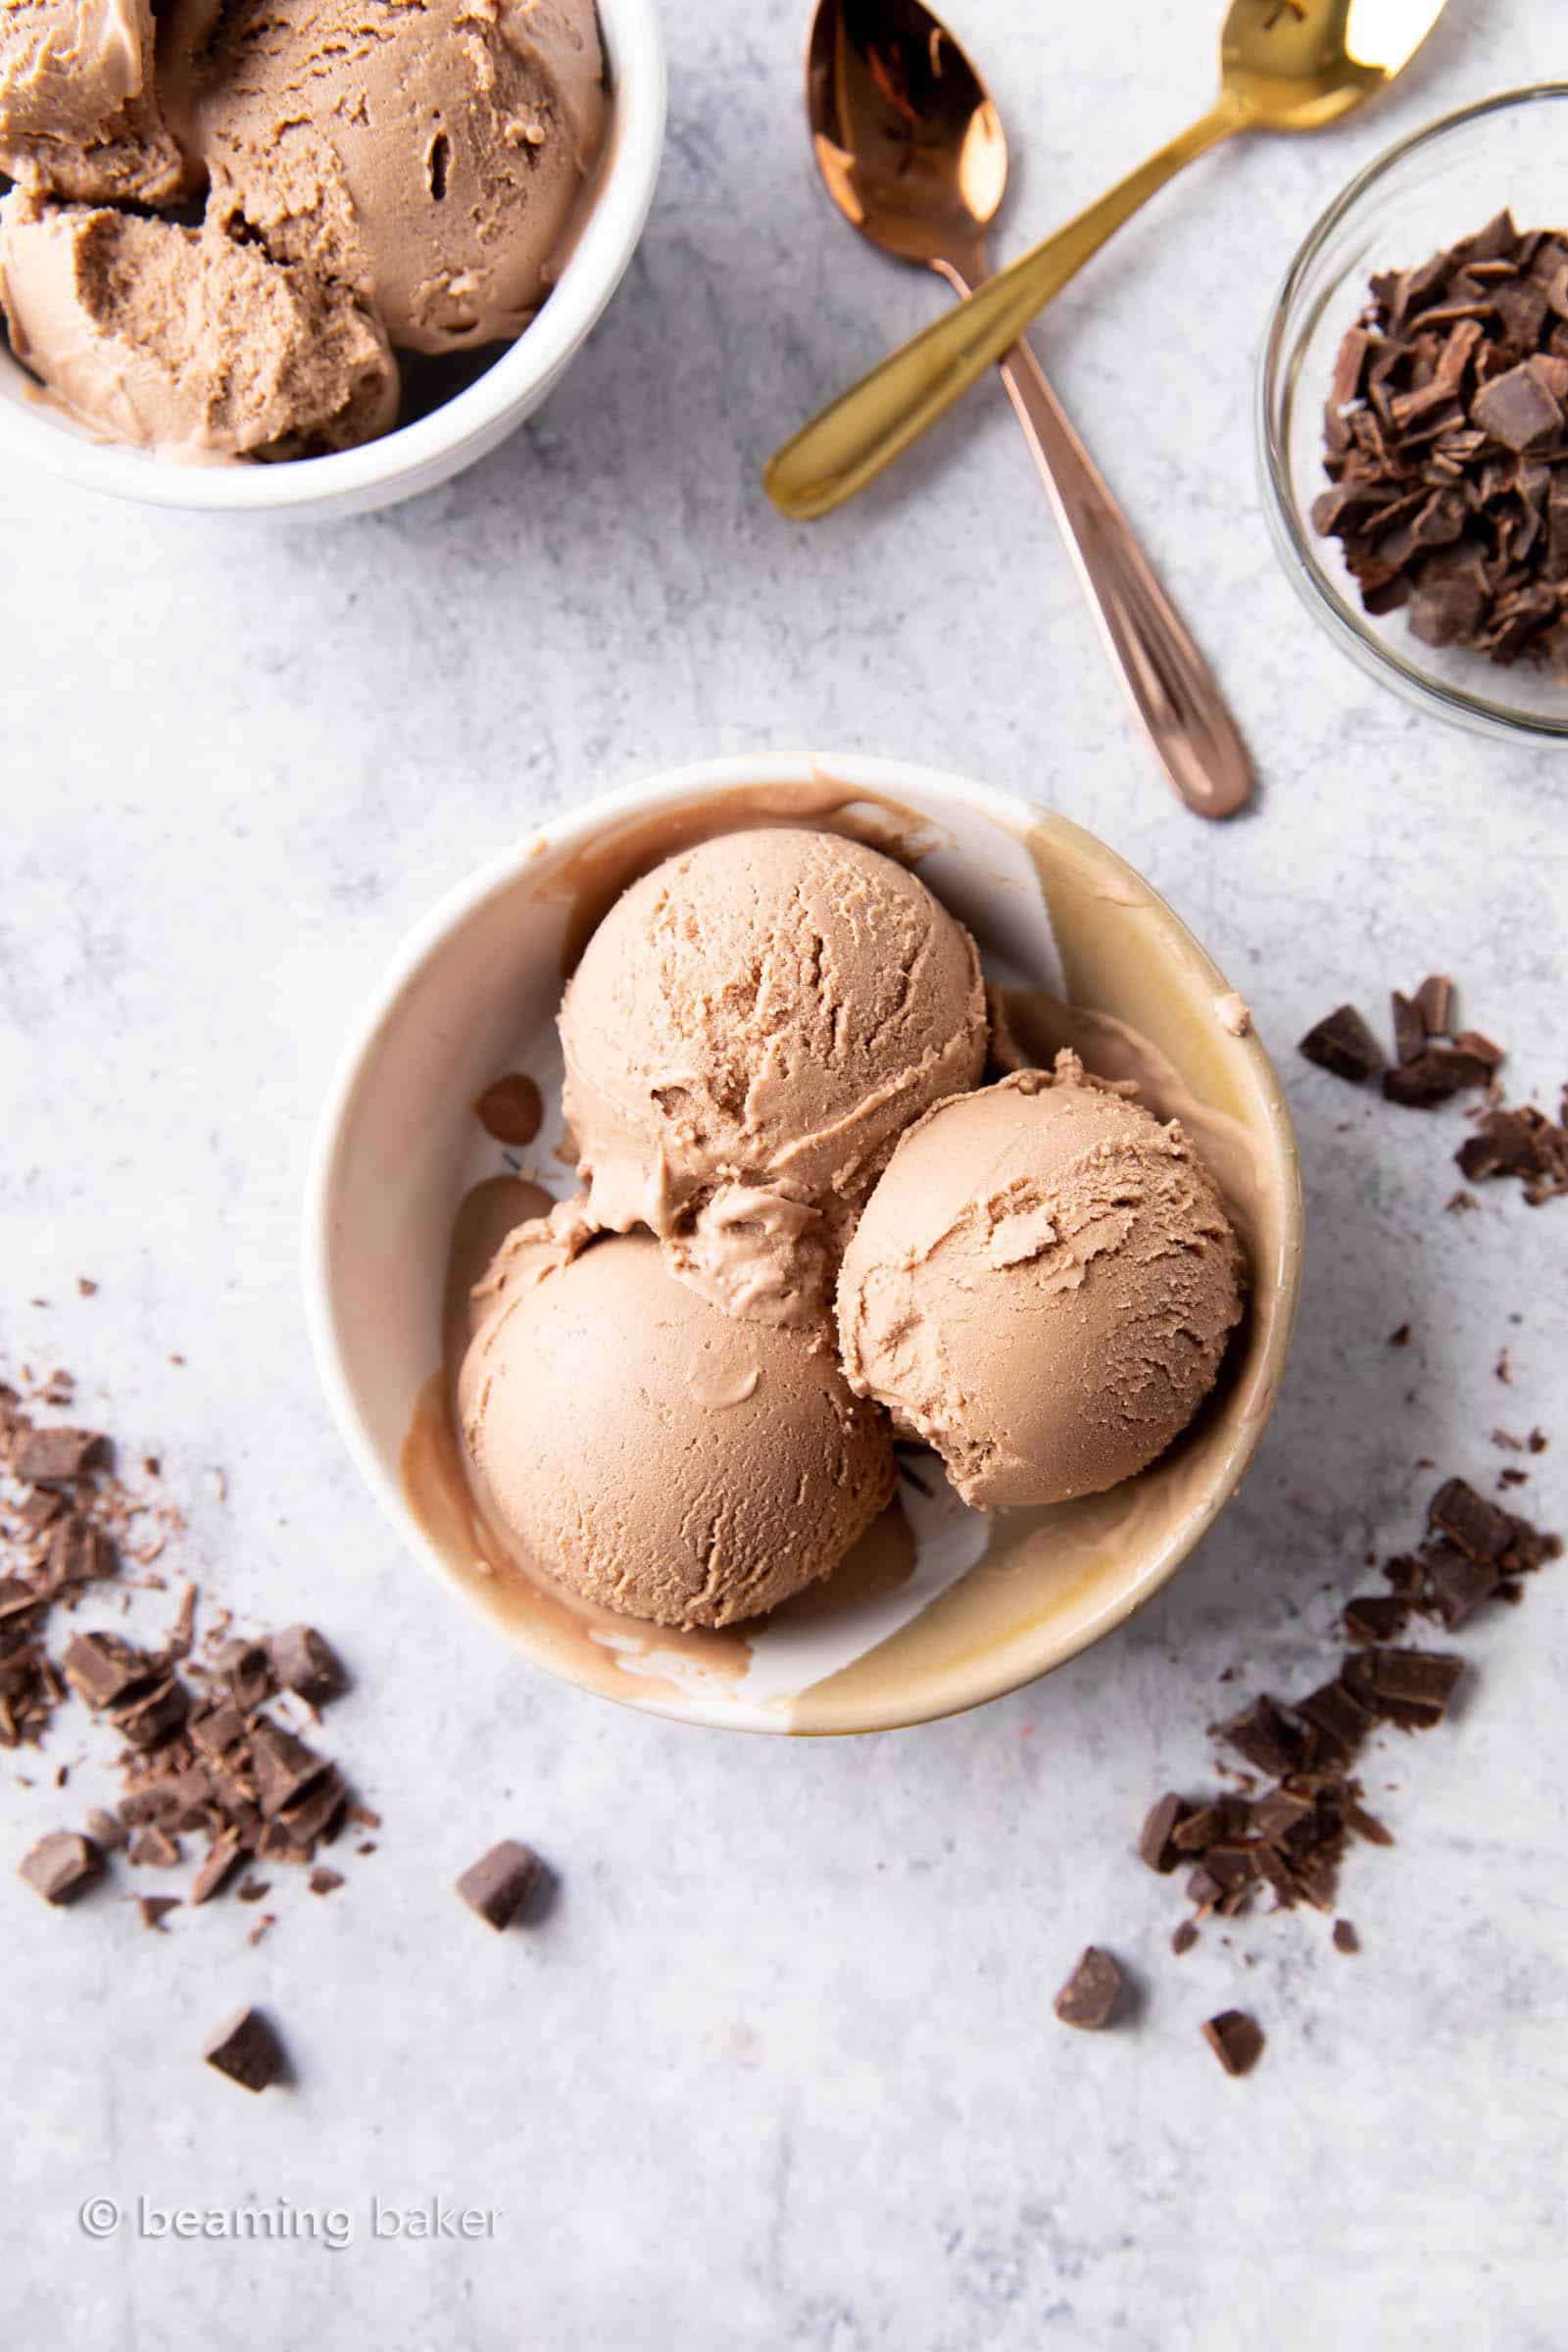 Best Vegan Chocolate Ice Cream Recipe: the BEST vegan chocolate ice cream recipe—rich ‘n creamy, unbelievable deep chocolate flavor and made with simple, whole ingredients. Deliciously decadent and guilt-free vegan chocolate ice cream. Dairy-Free. #Vegan #Chocolate #IceCream #VeganIceCream | Recipe at BeamingBaker.com